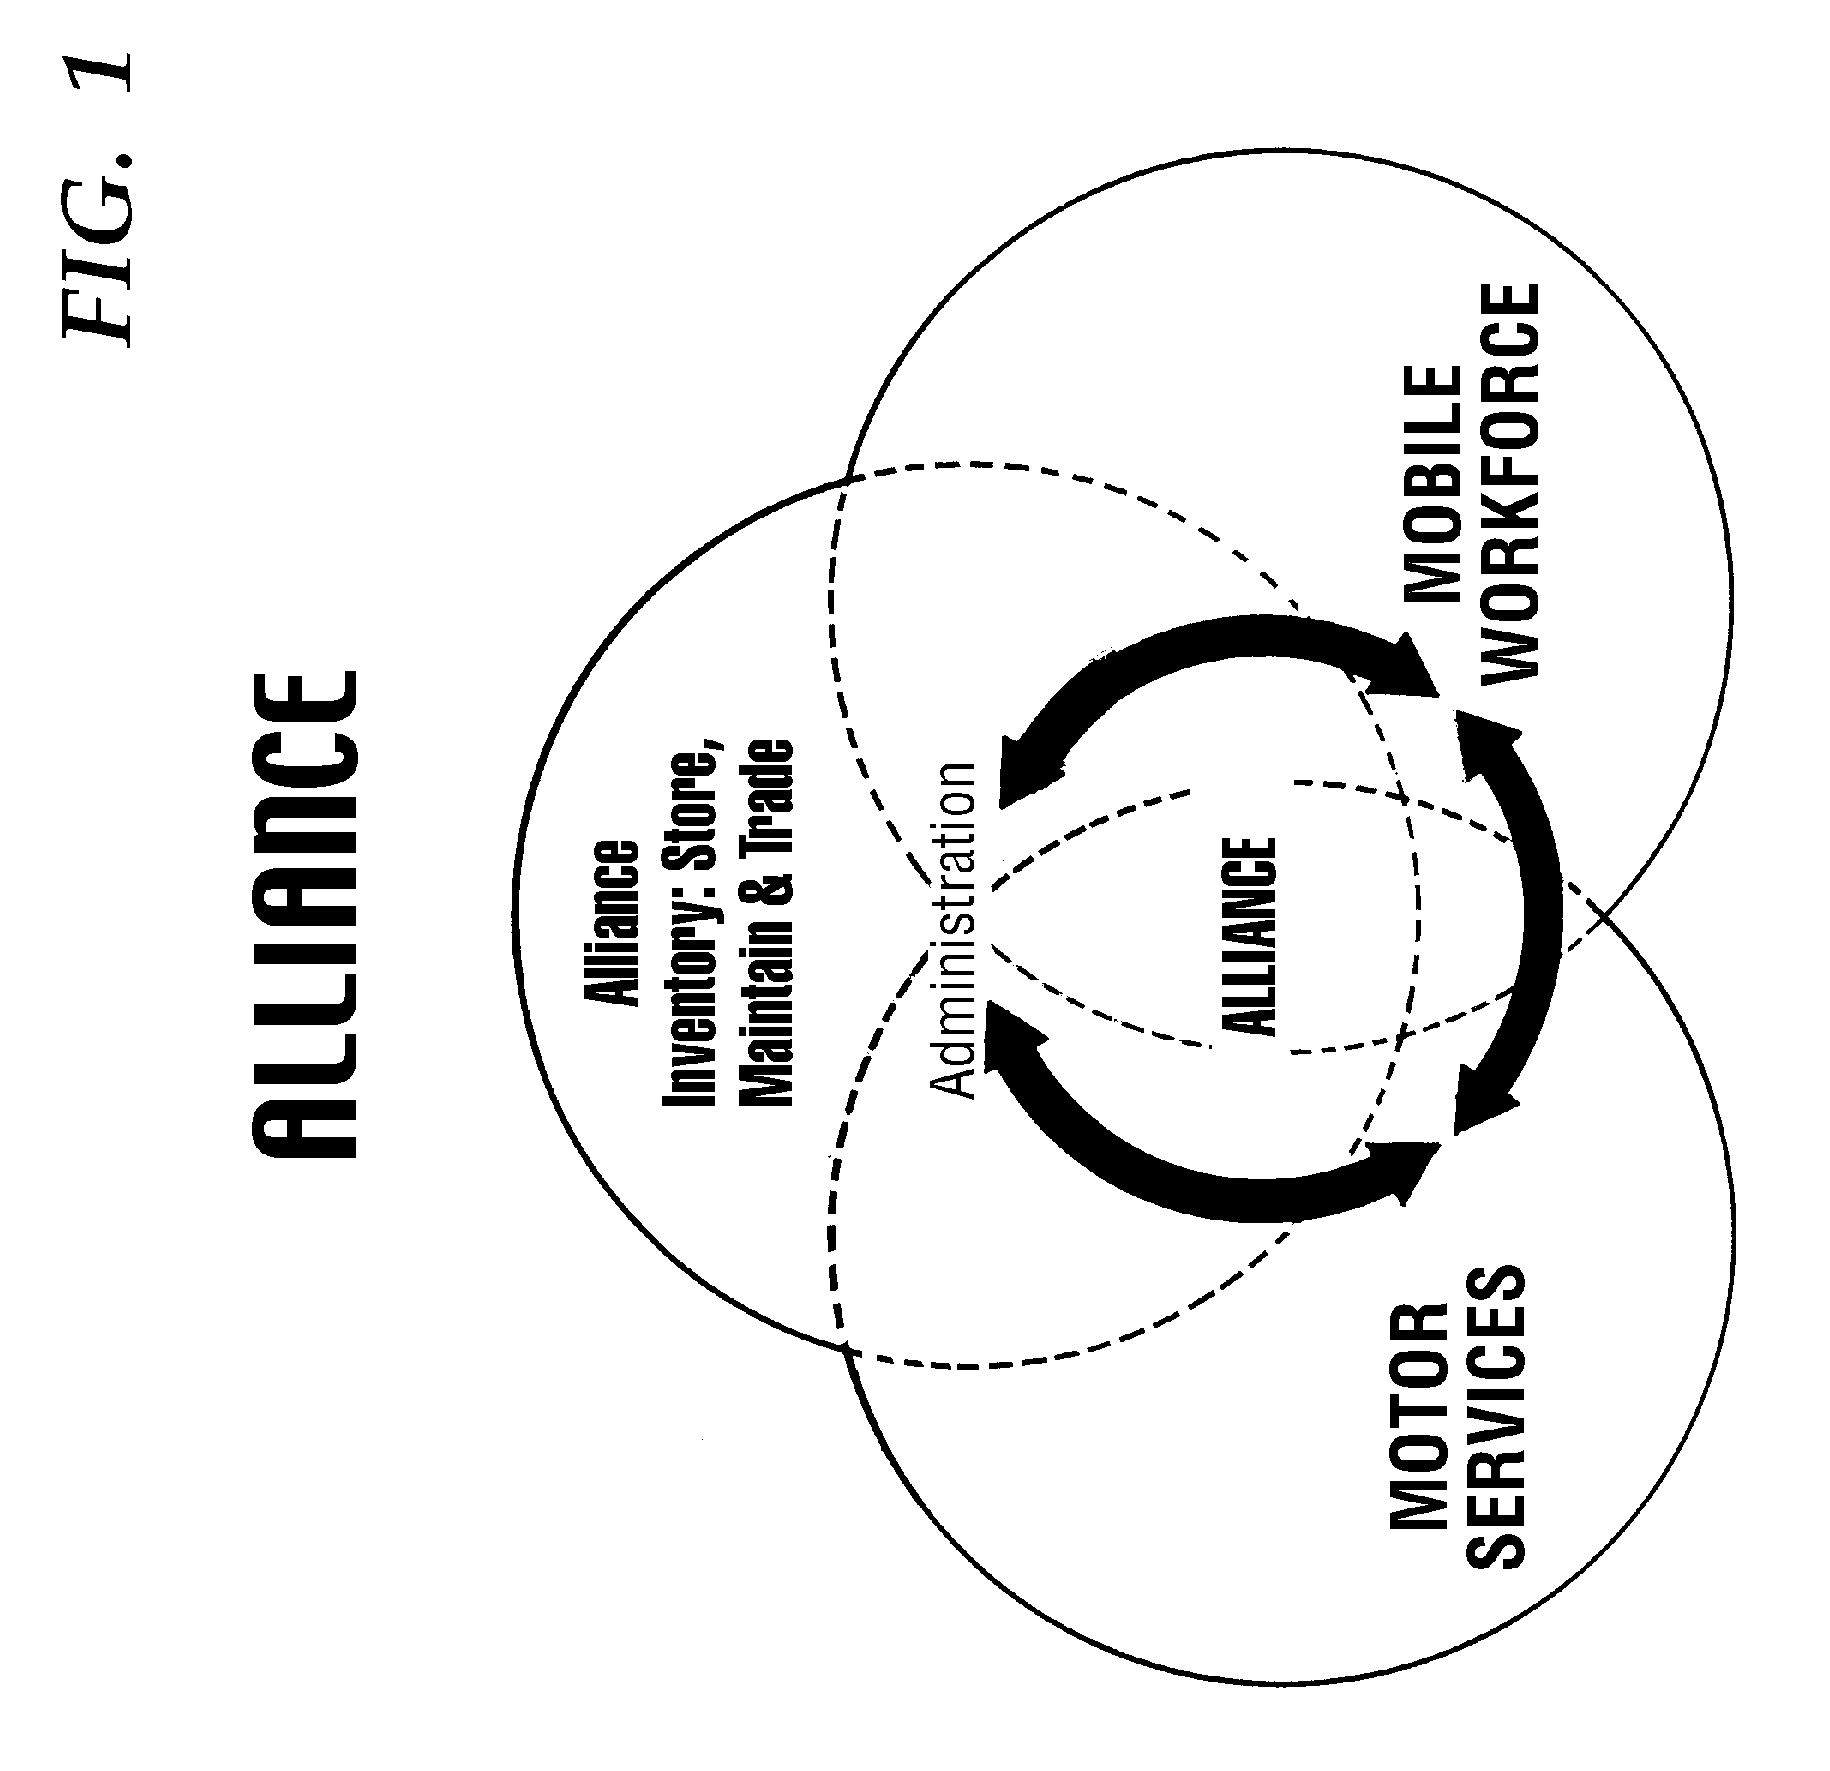 Process for providing replacement electric motors